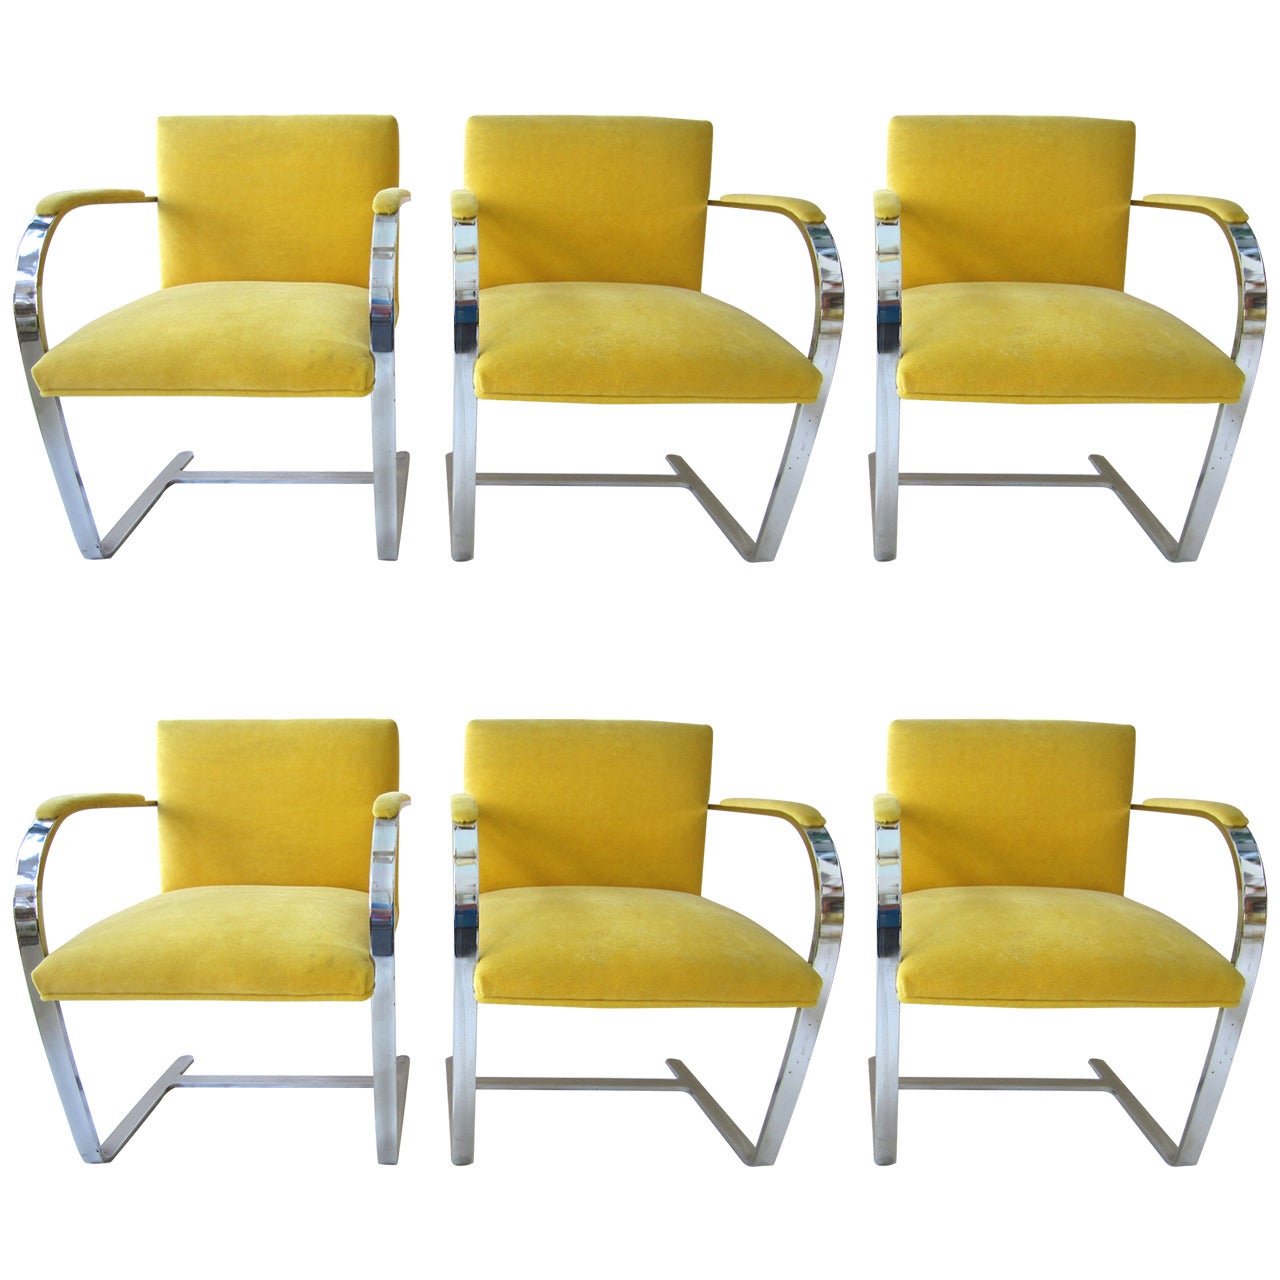 Six 1960s Mies van der Rohe BRNO Dining Chairs in Yellow Mohair